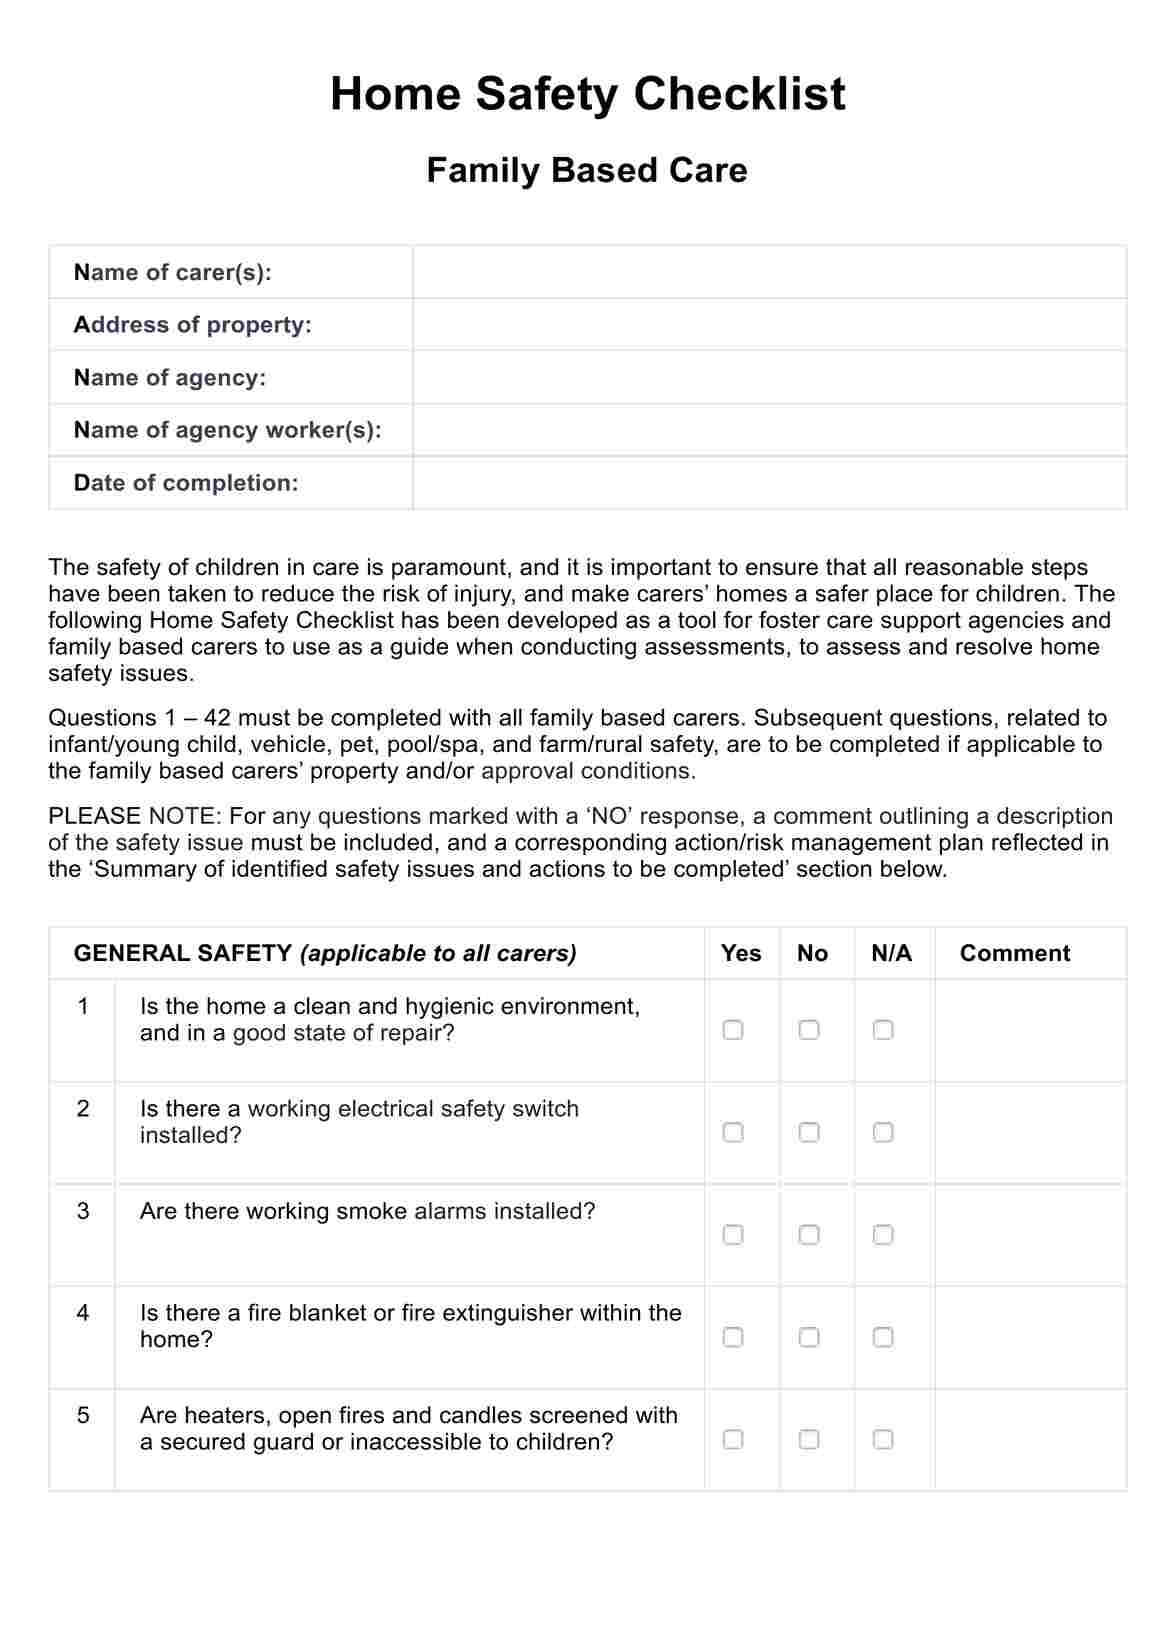 CPS Home Visit Checklist PDF Example